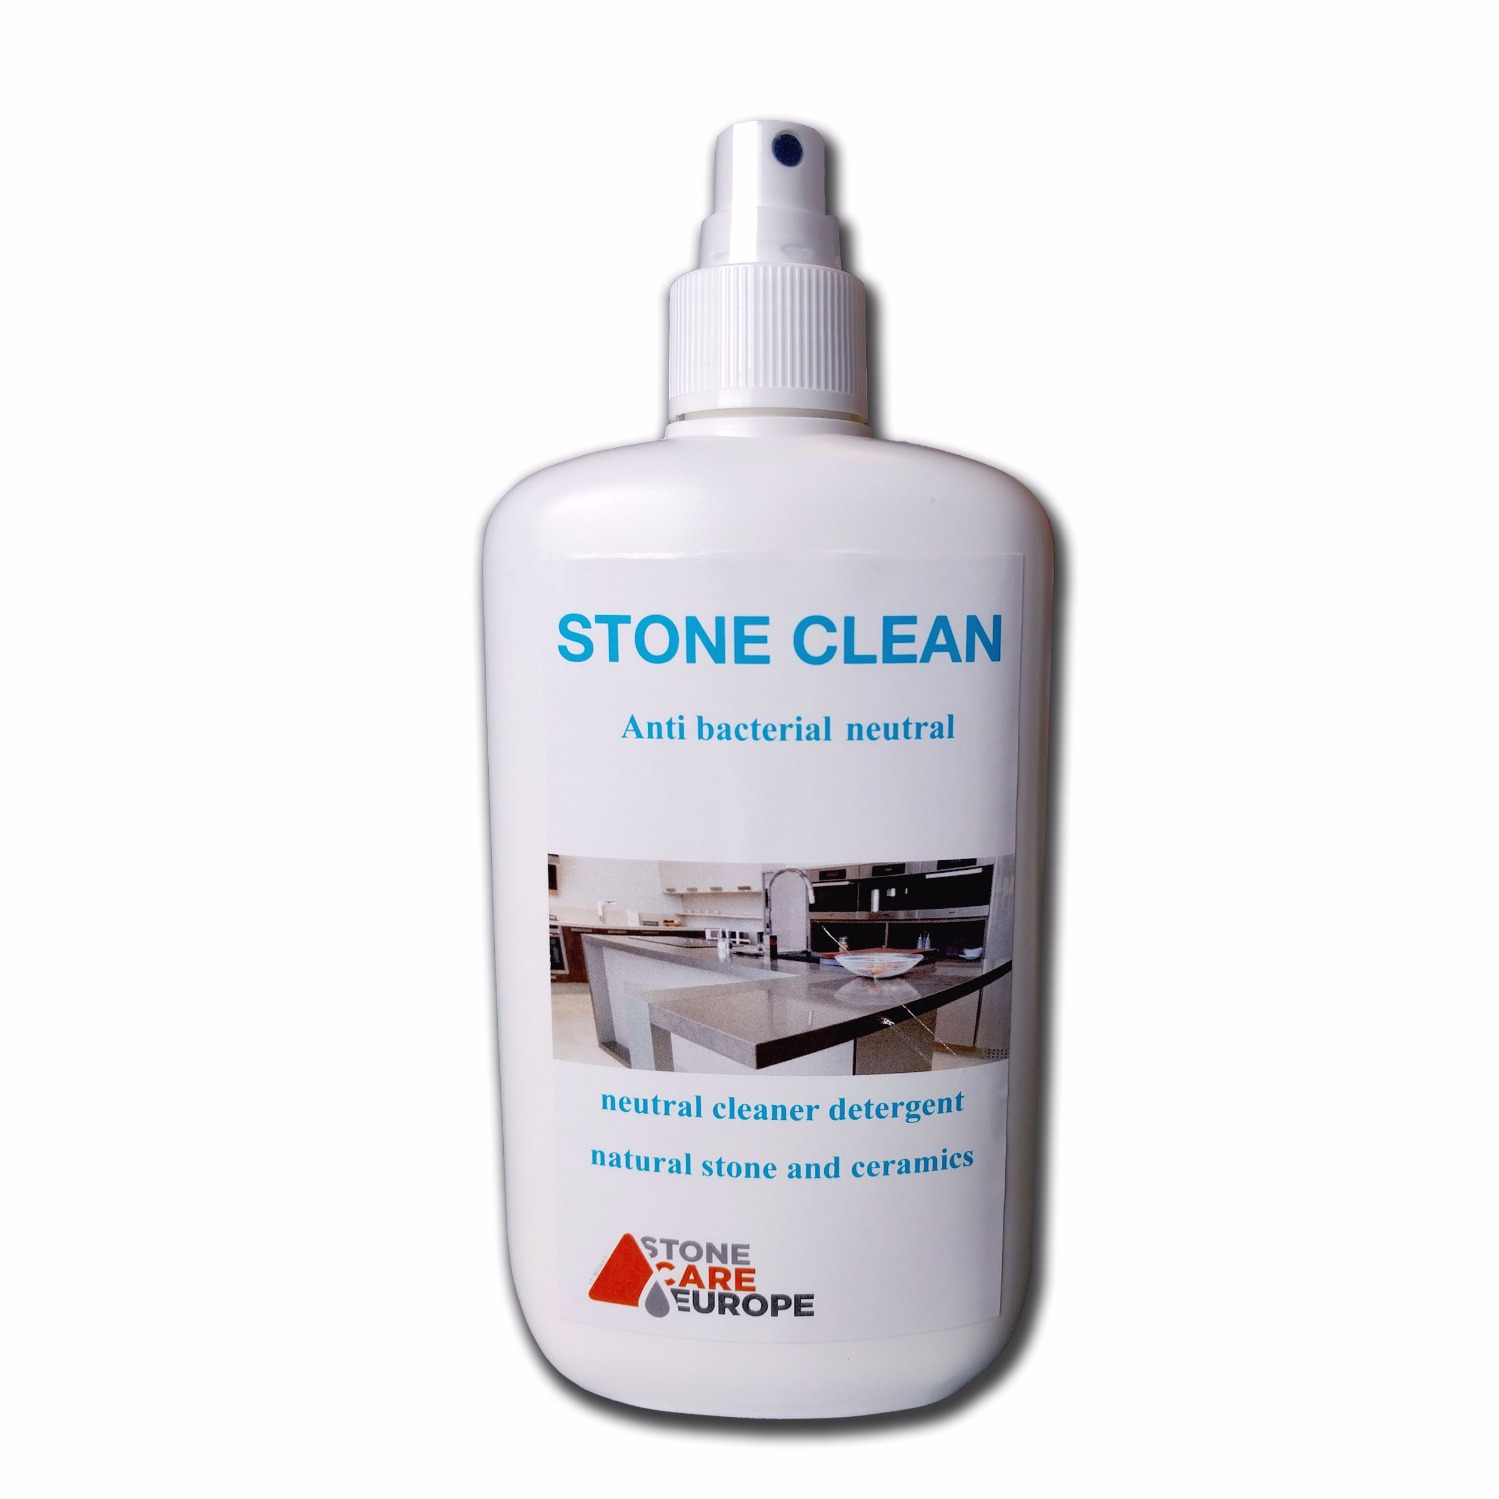 Stone Care Europe Srl - Clean, Maintanance and Protection your Stone